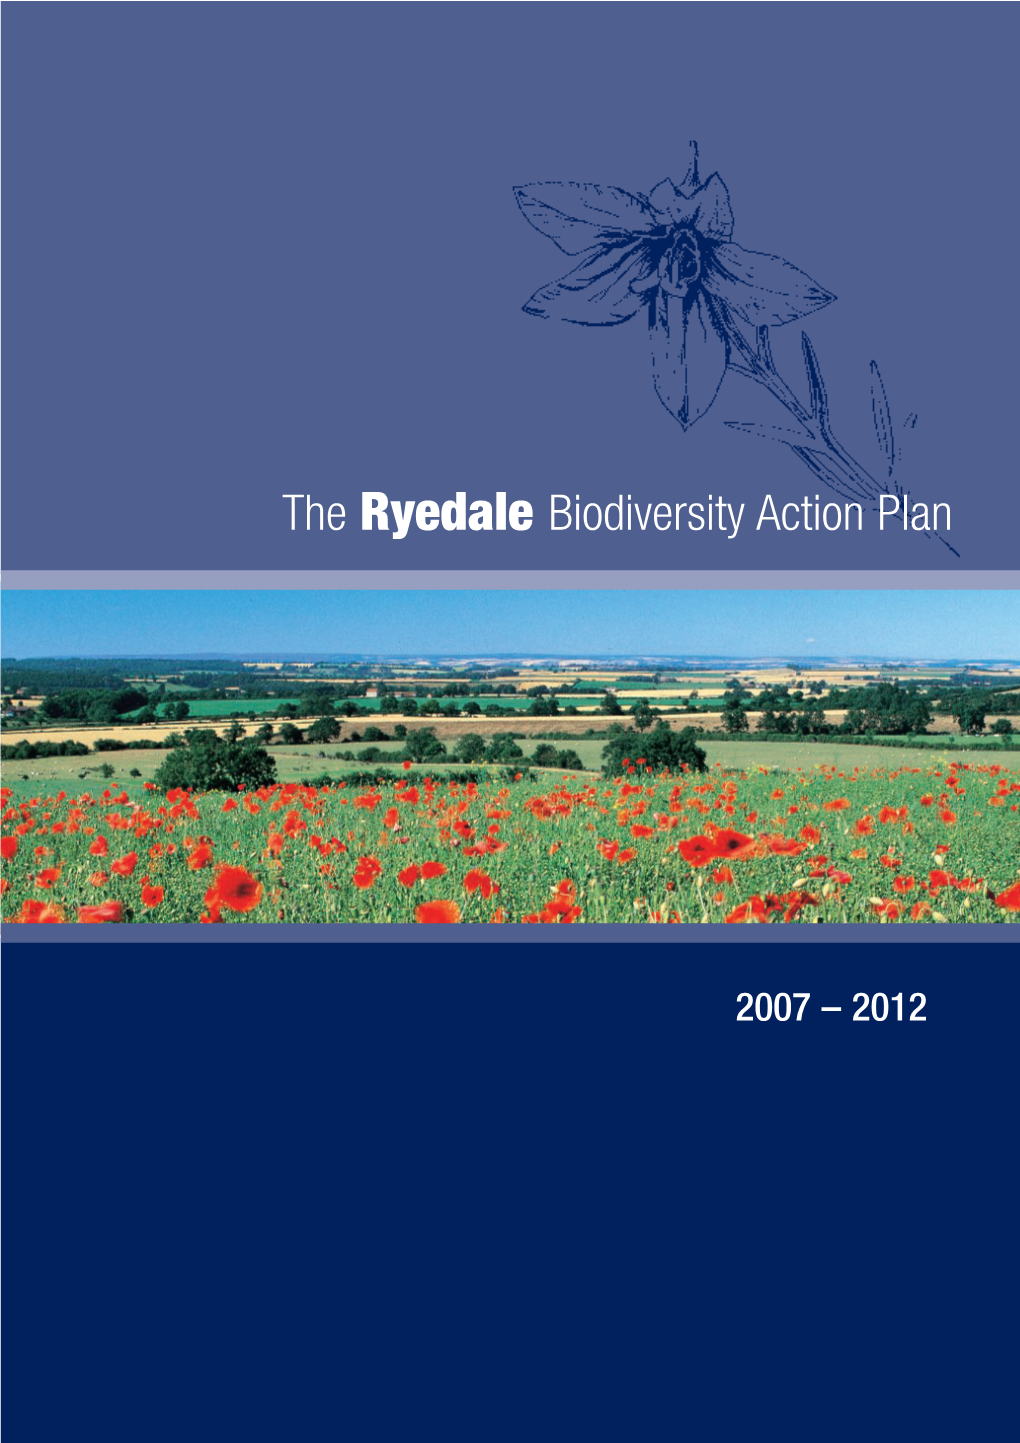 The Ryedale Biodiversity Action Plan